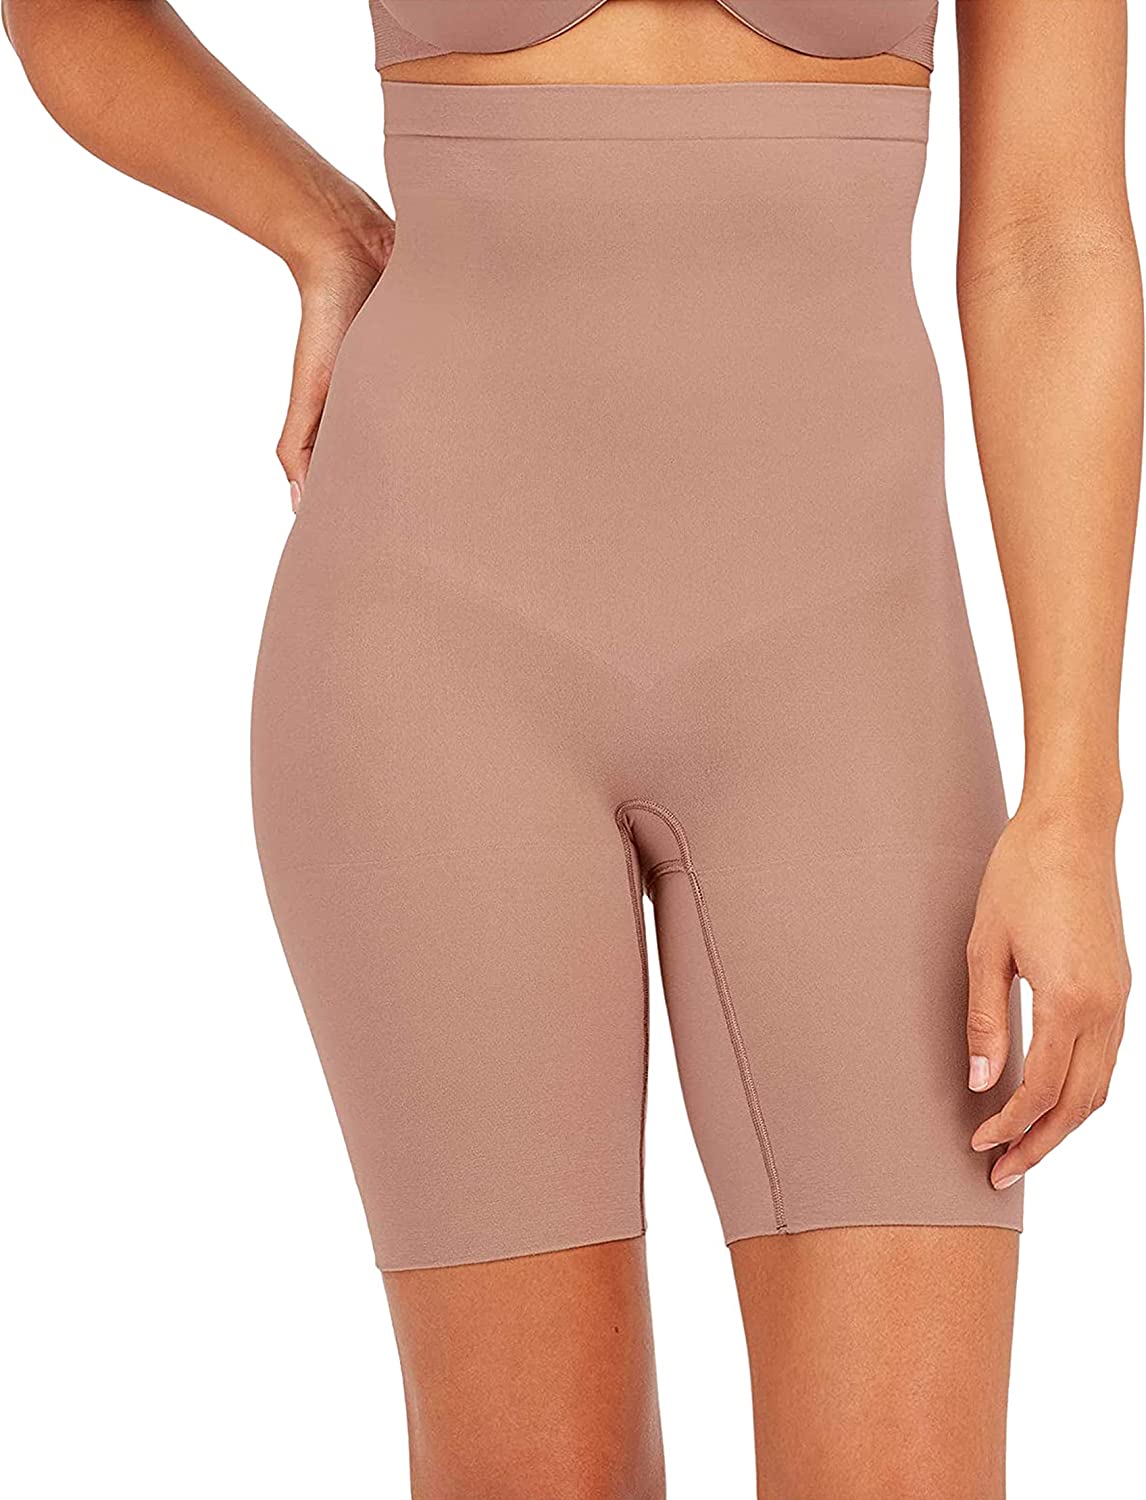 SPANX Higher Power Shorts - High-Rise Waist with Double Gusset